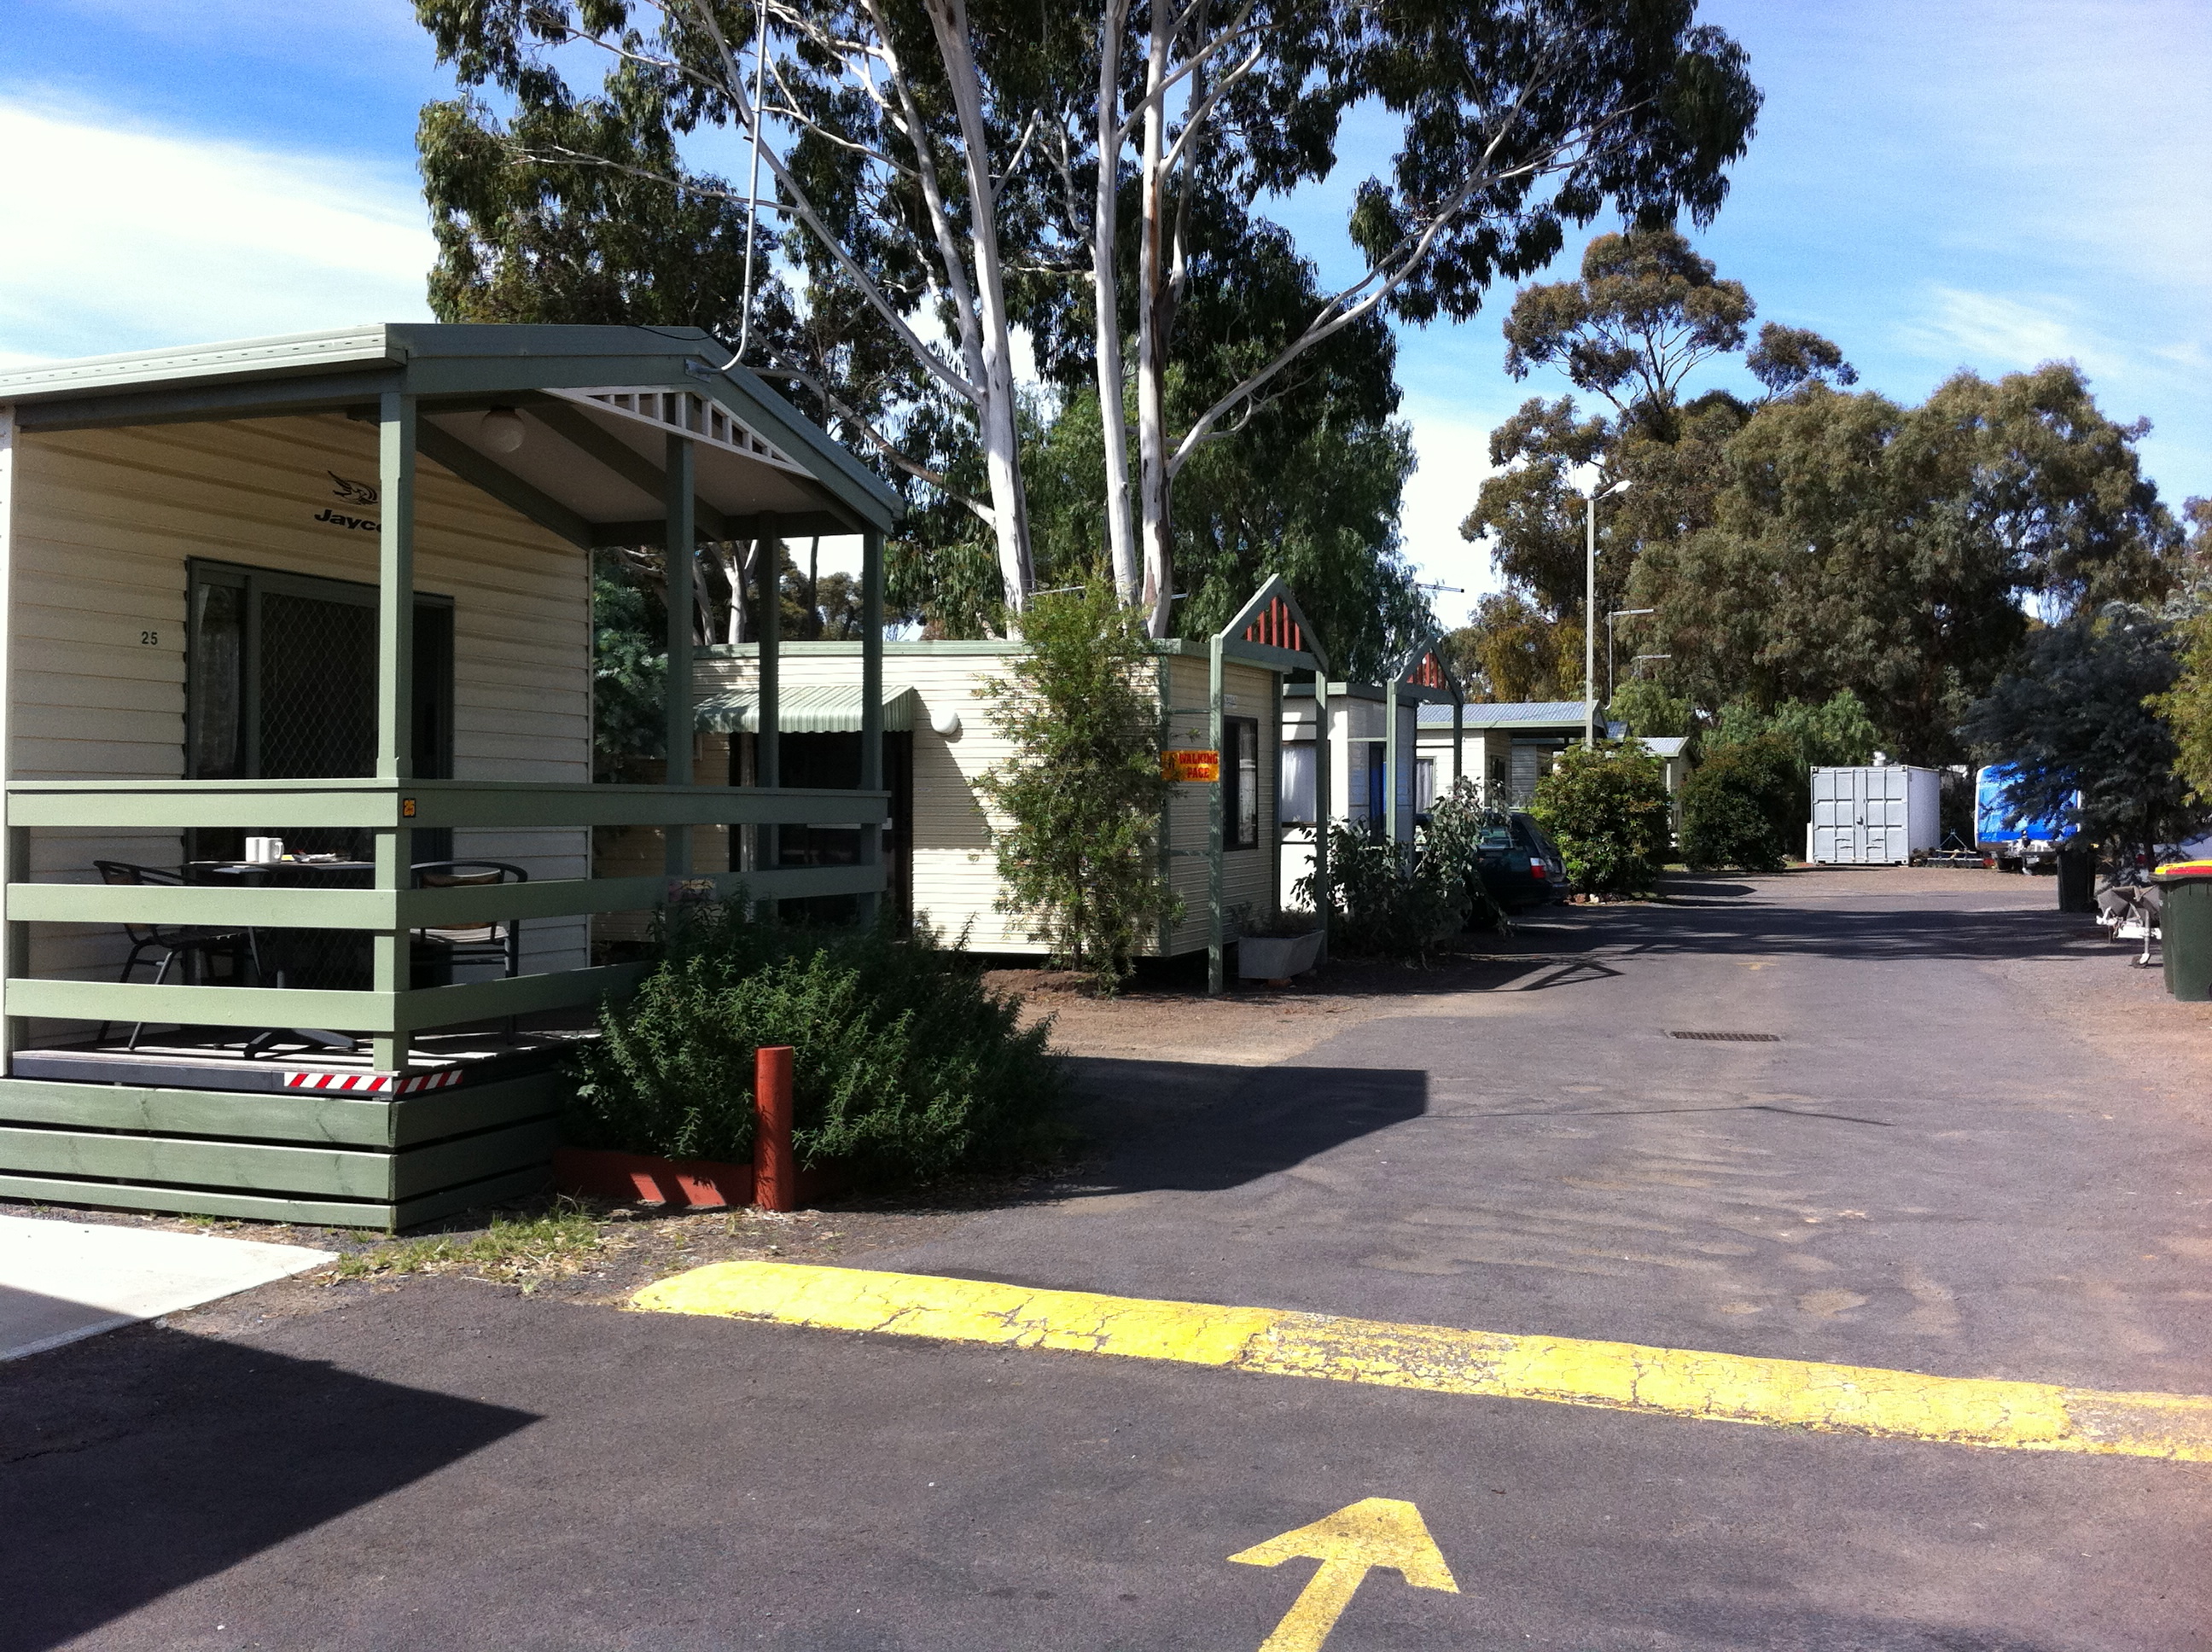 Golden Country Motel and Caravan Park - Maryborough: Cottage accommodation, ideal for families, couples and singles